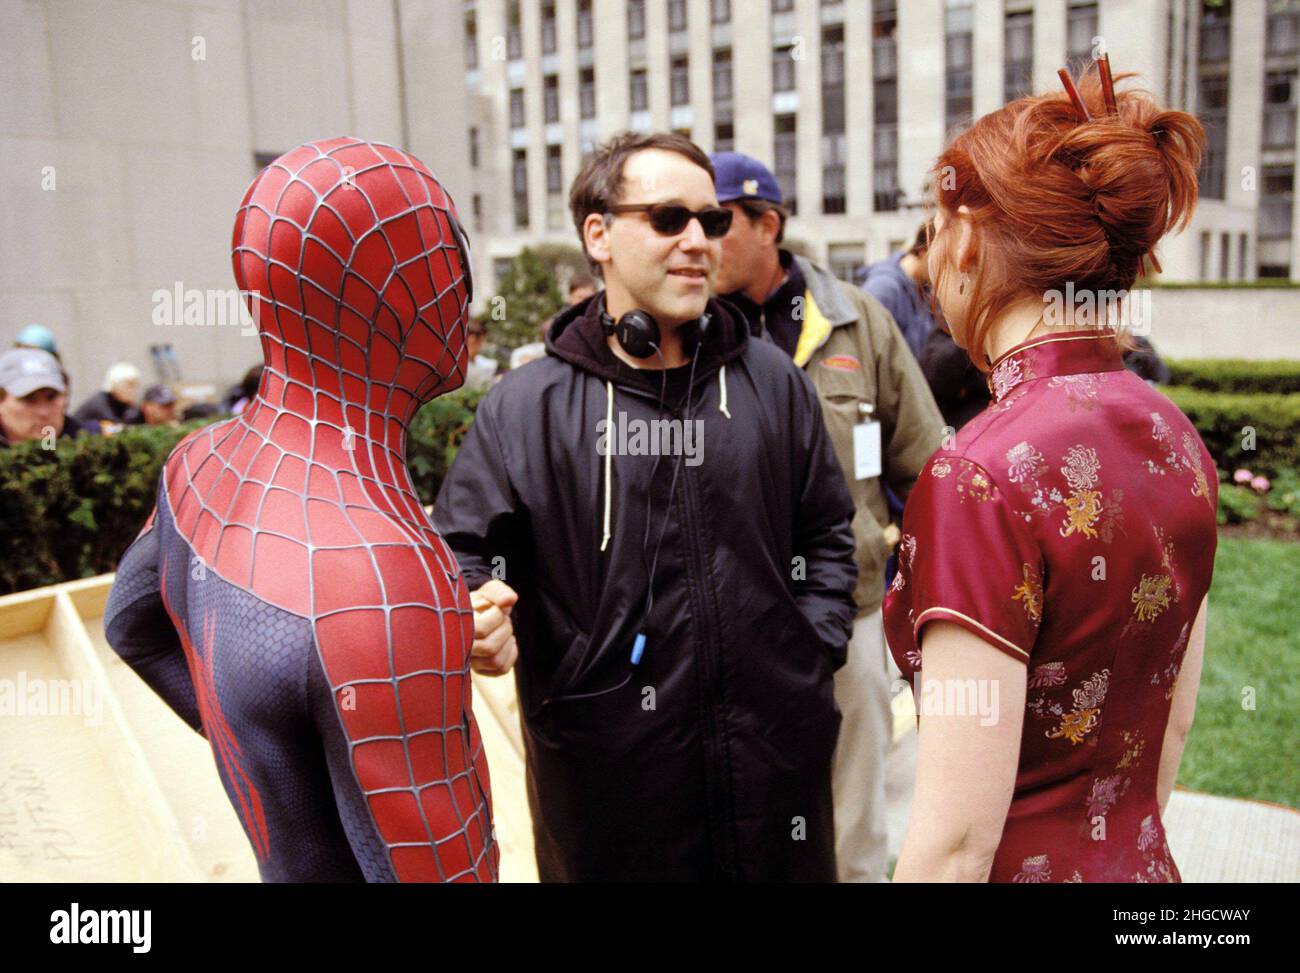 KIRSTEN DUNST, SAM RAIMI and TOBEY MAGUIRE in SPIDER-MAN (2002), directed by SAM RAIMI. Credit: COLUMBIA PICTURES/MARVEL ENTERTAINMENT / Album Stock Photo